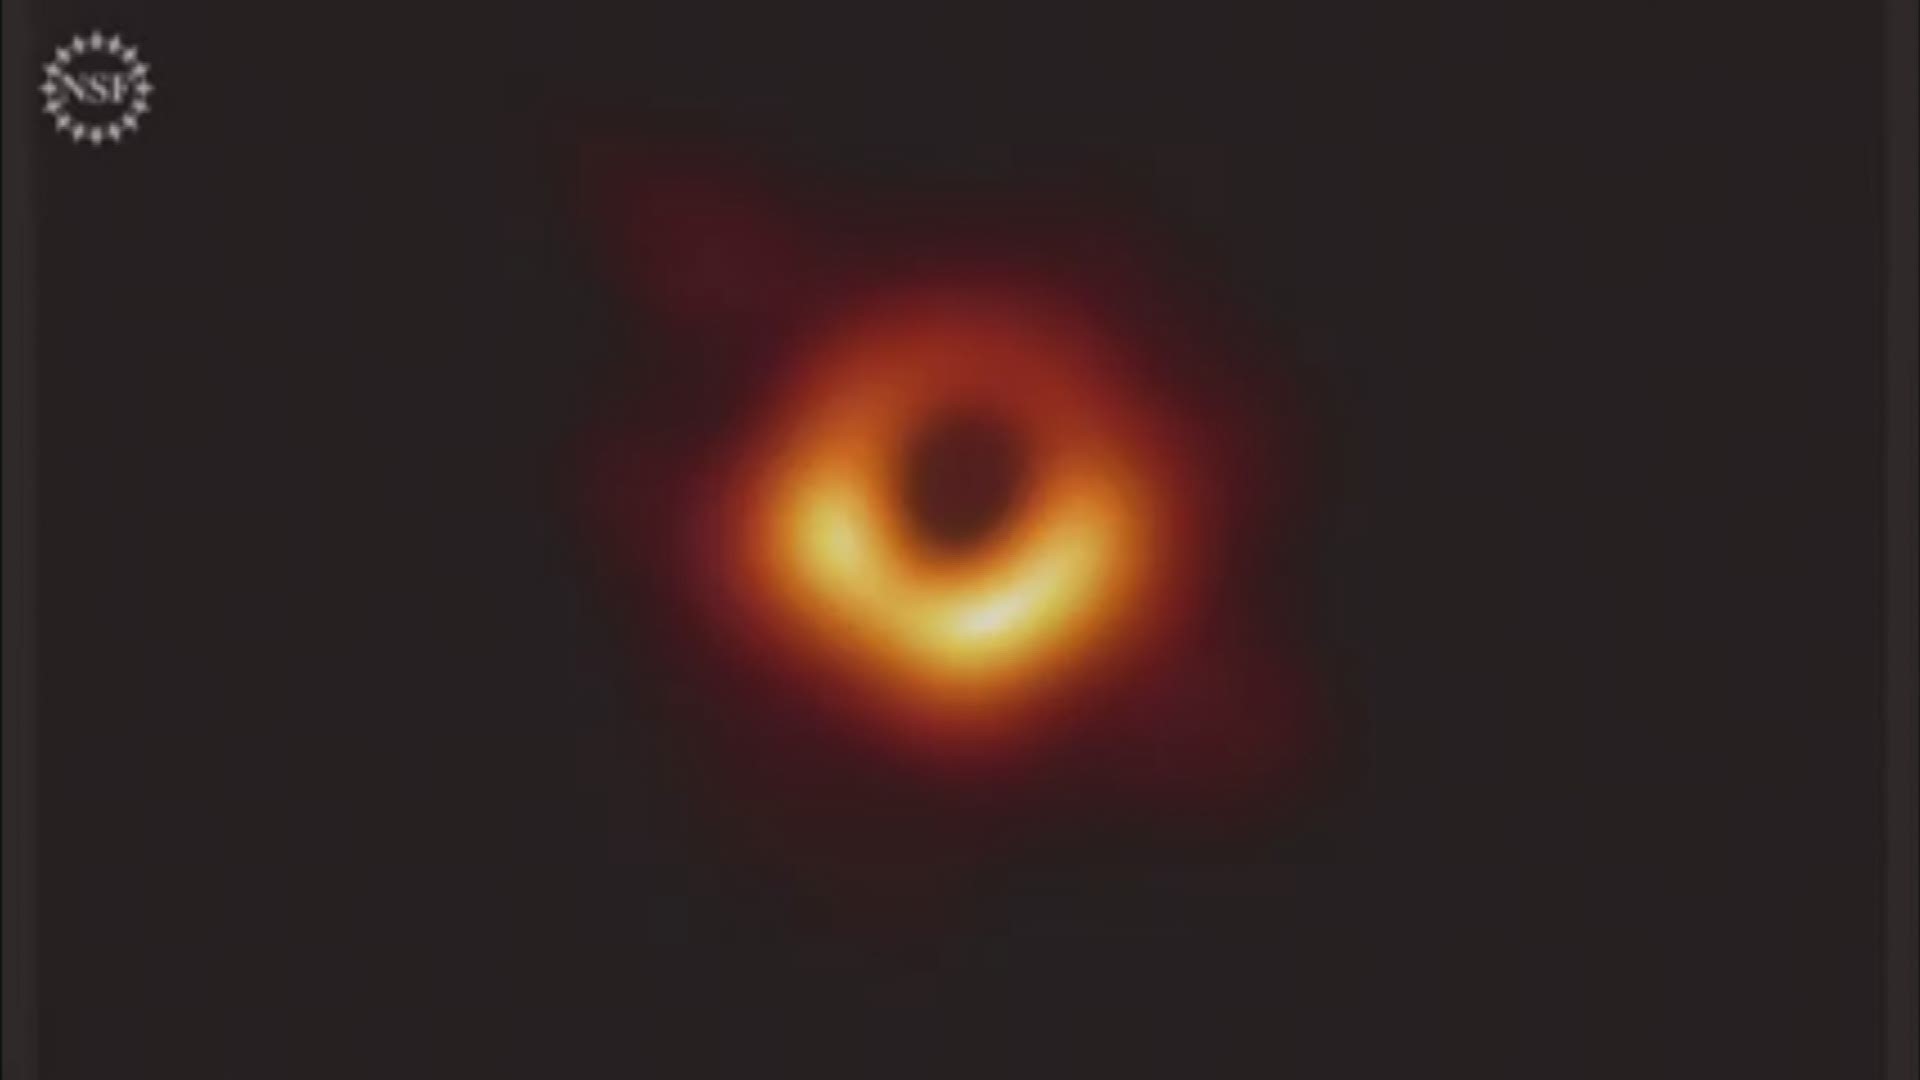 first black hole image